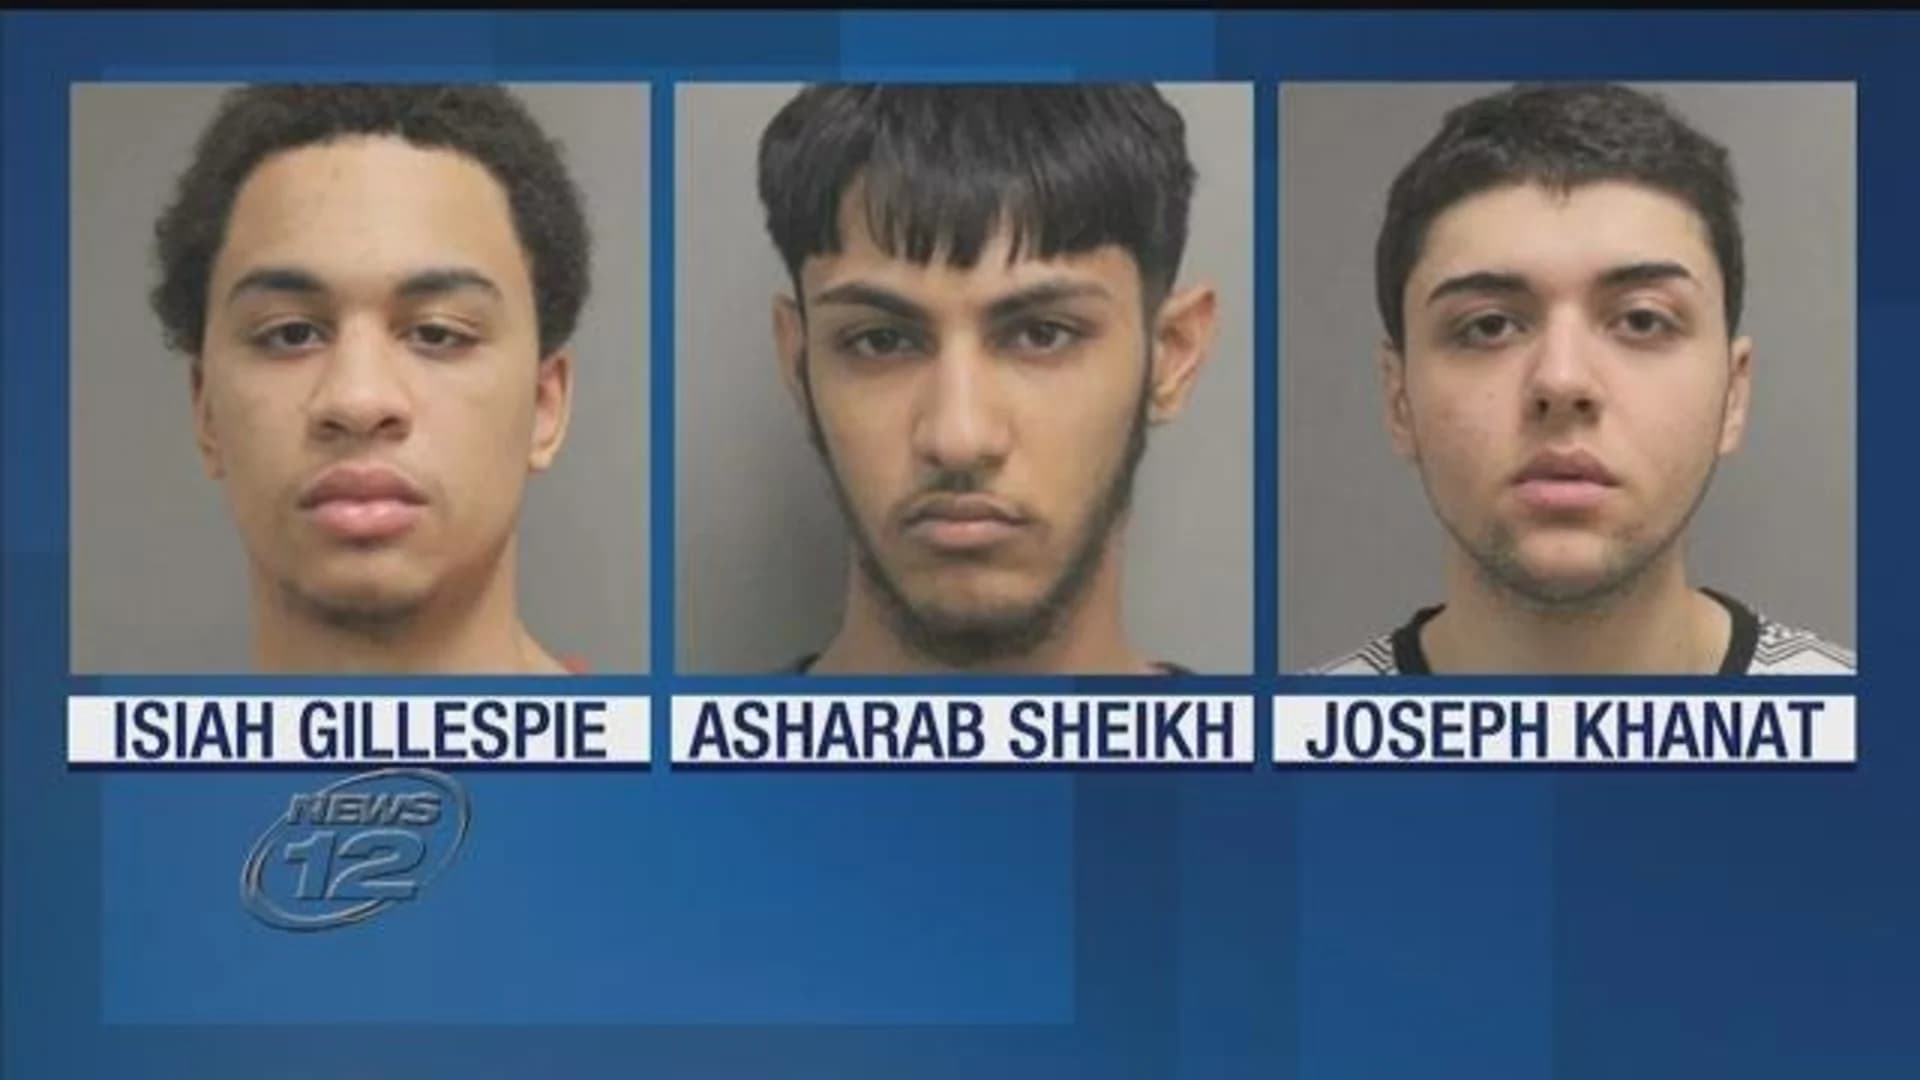 5 Farmingdale High School students face gang assault charges